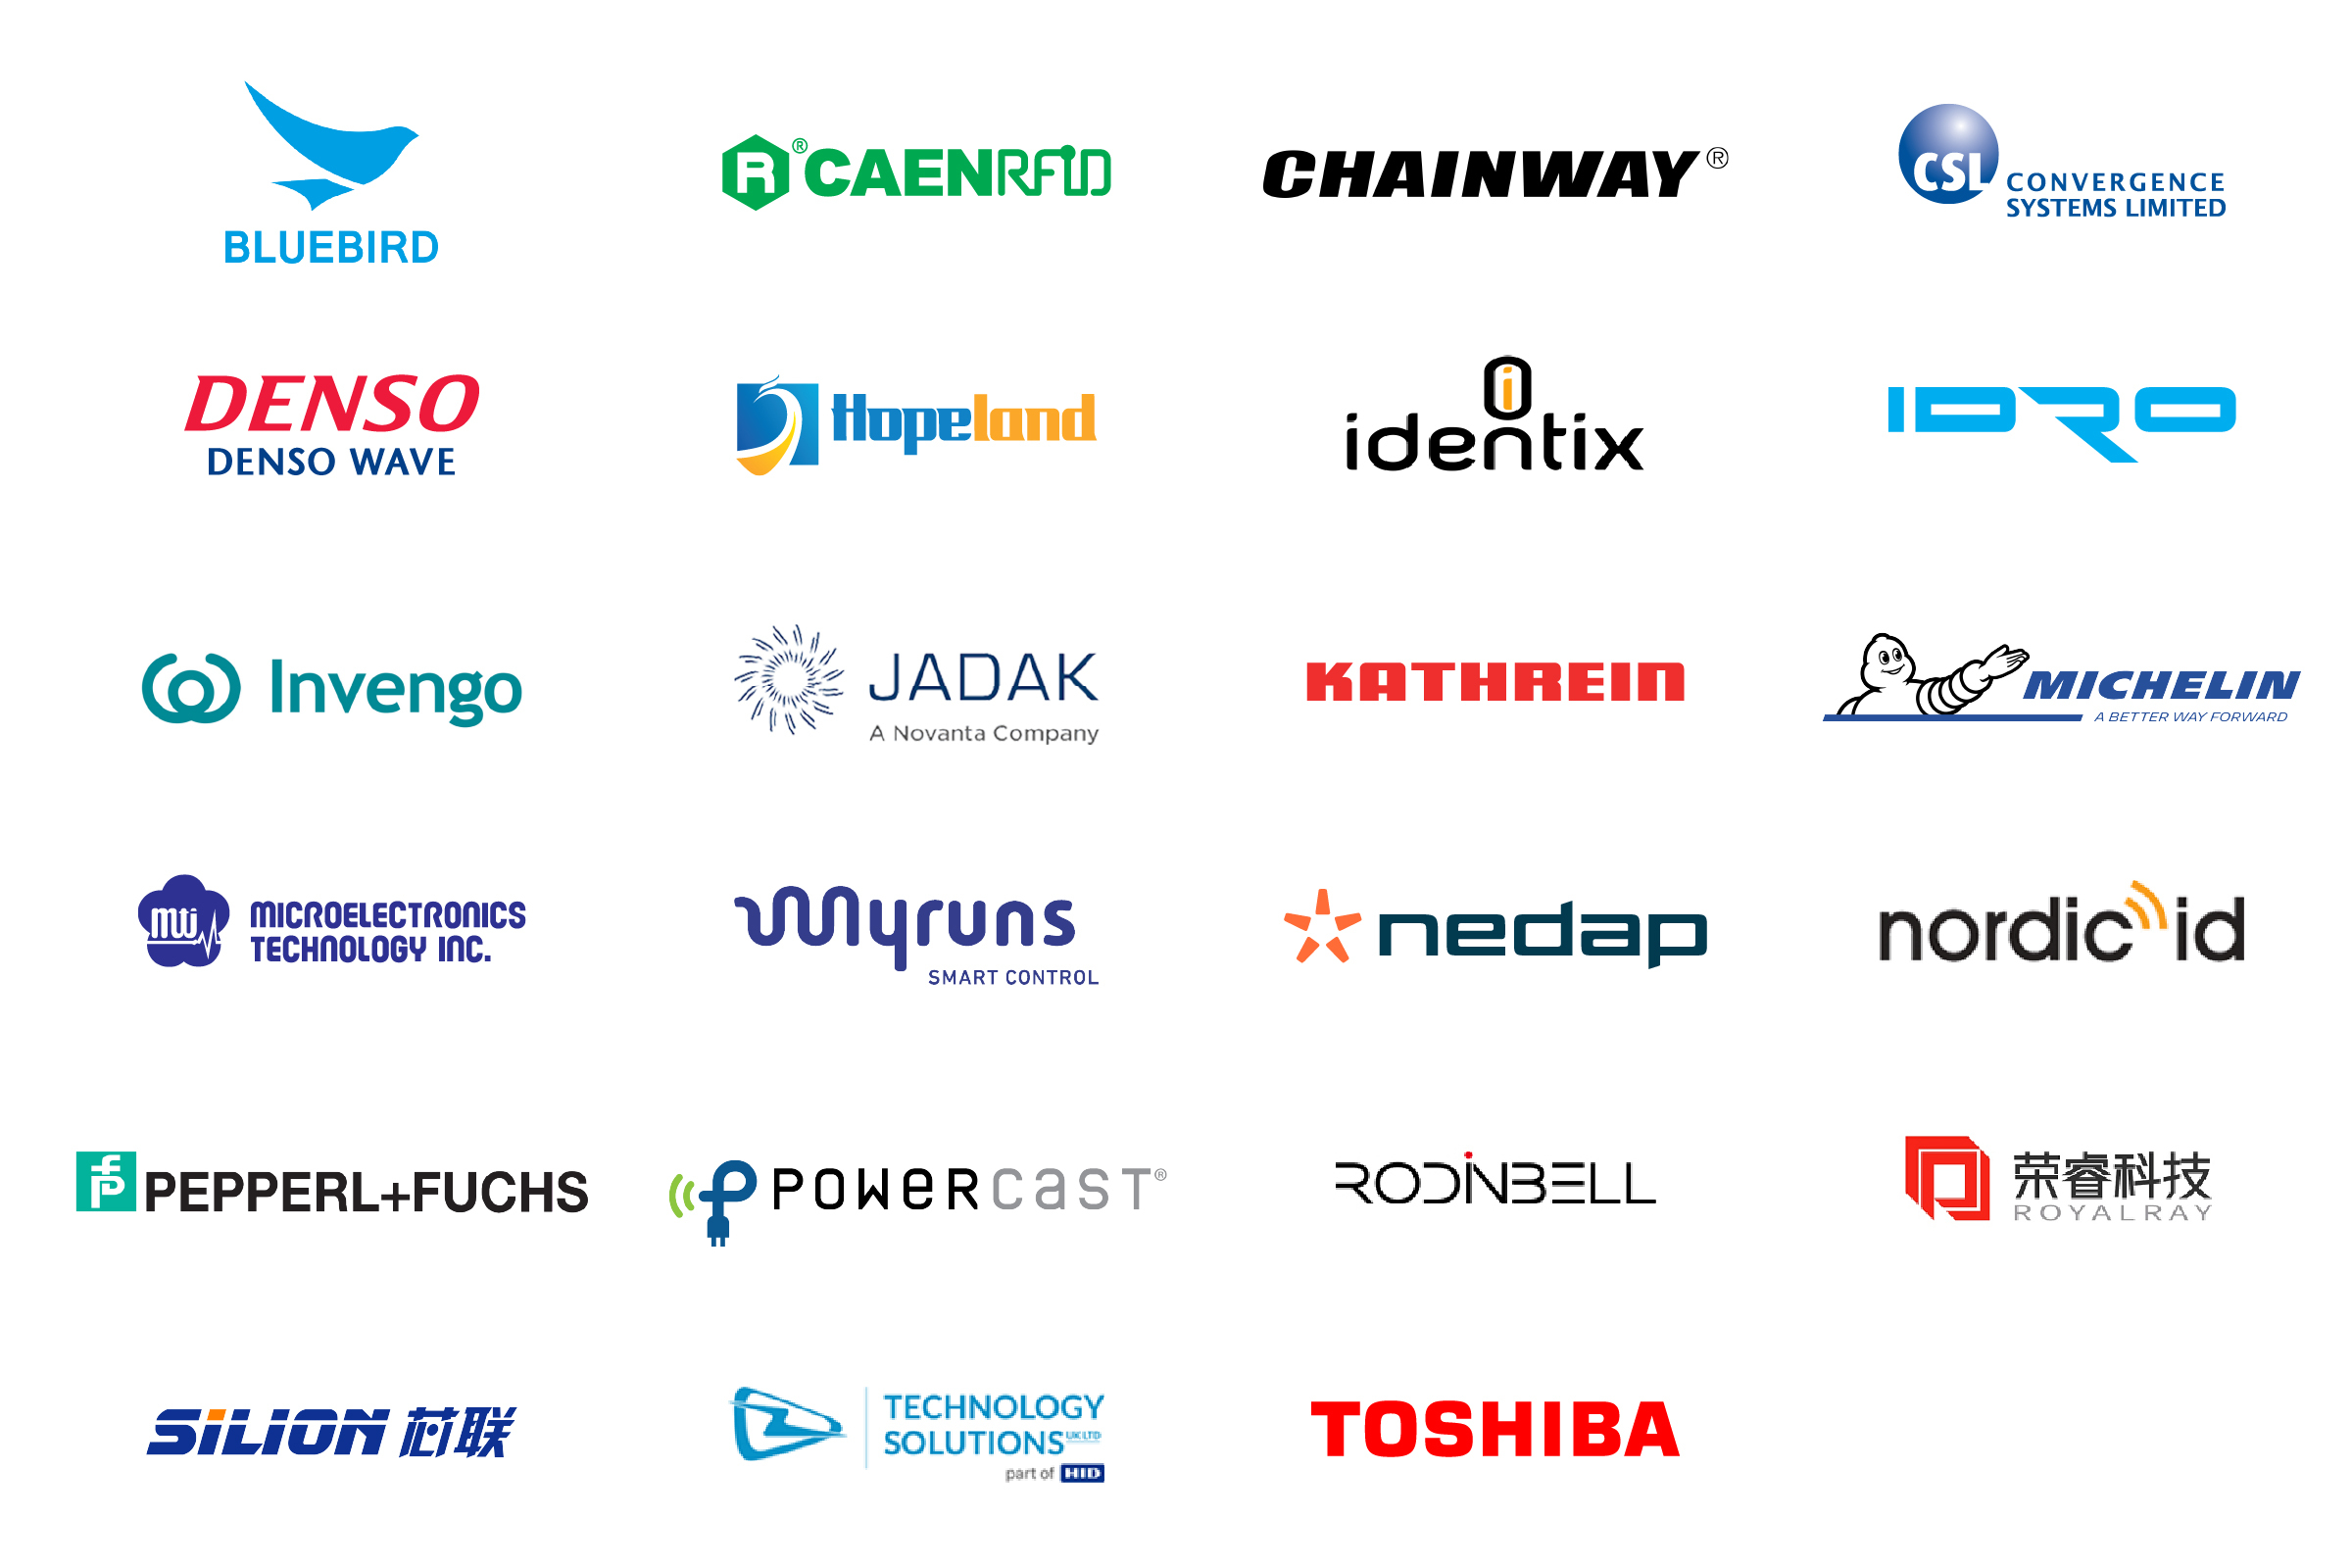 The image showcases a collection of logos from various prominent technology companies, indicating a partnership